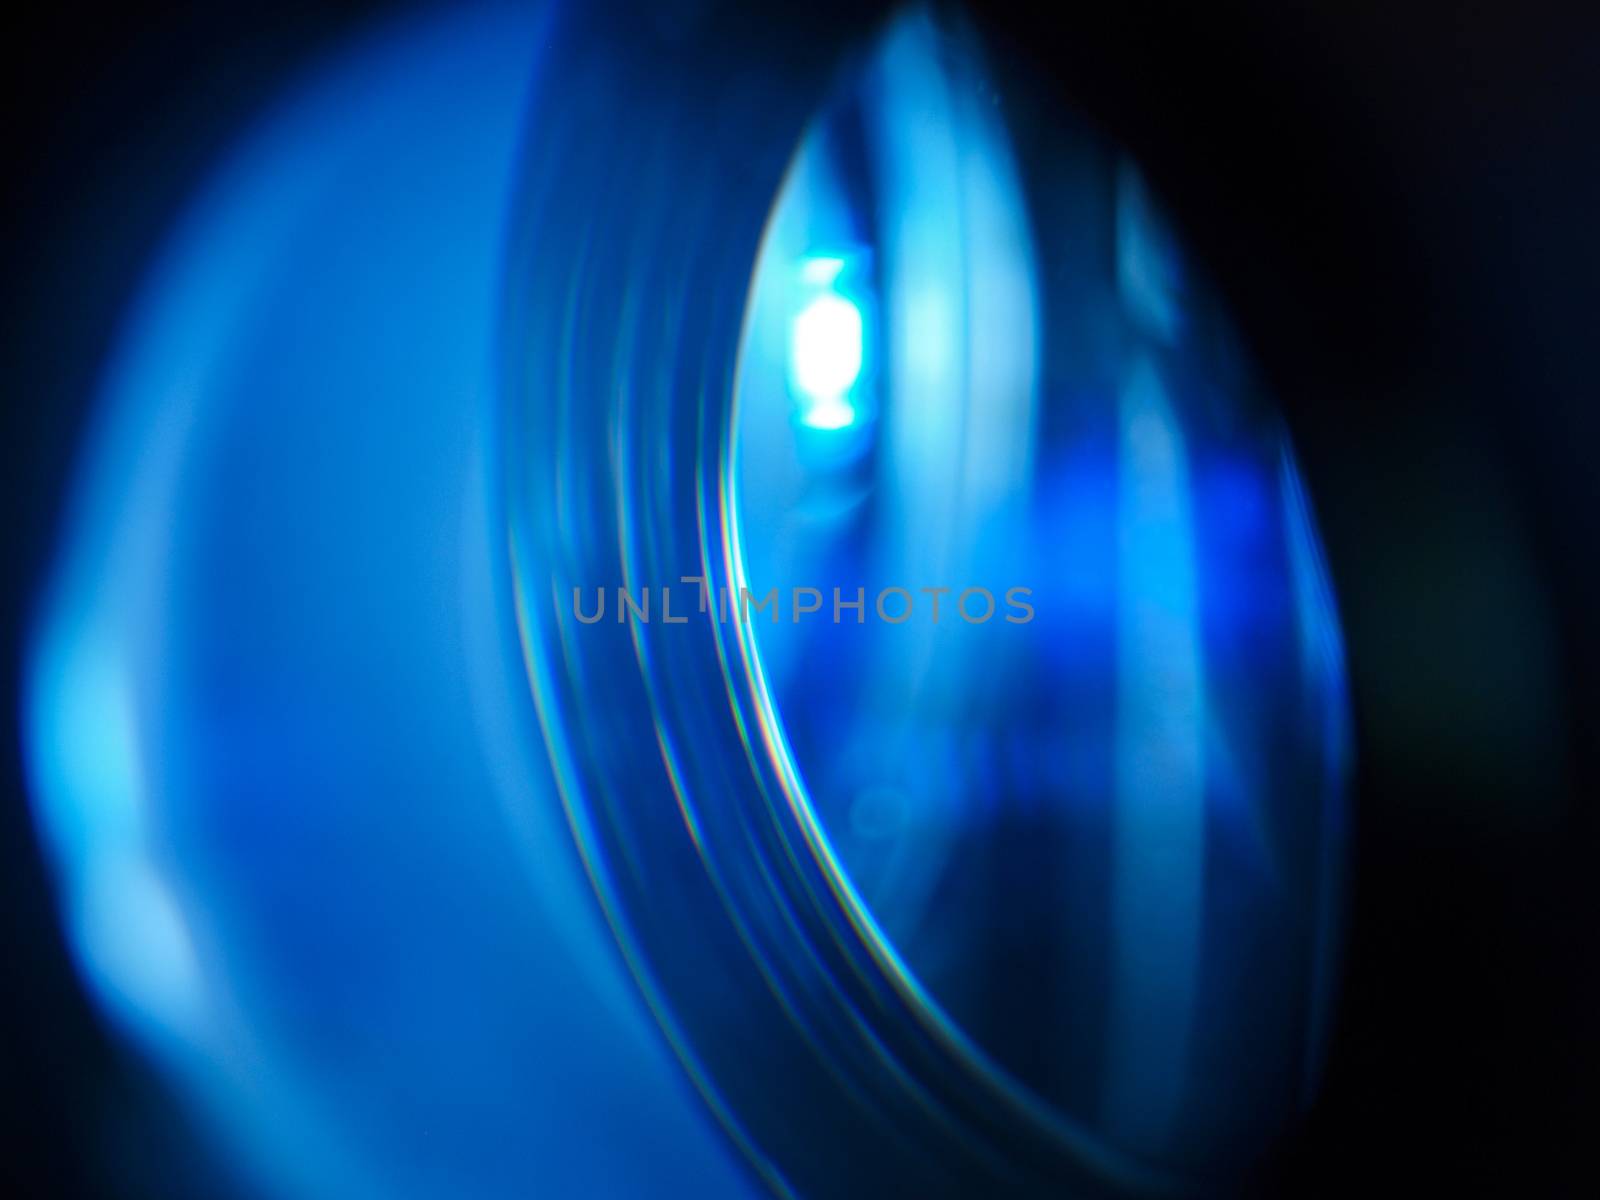 Led projector lens close up with soft focus. Blue lights.